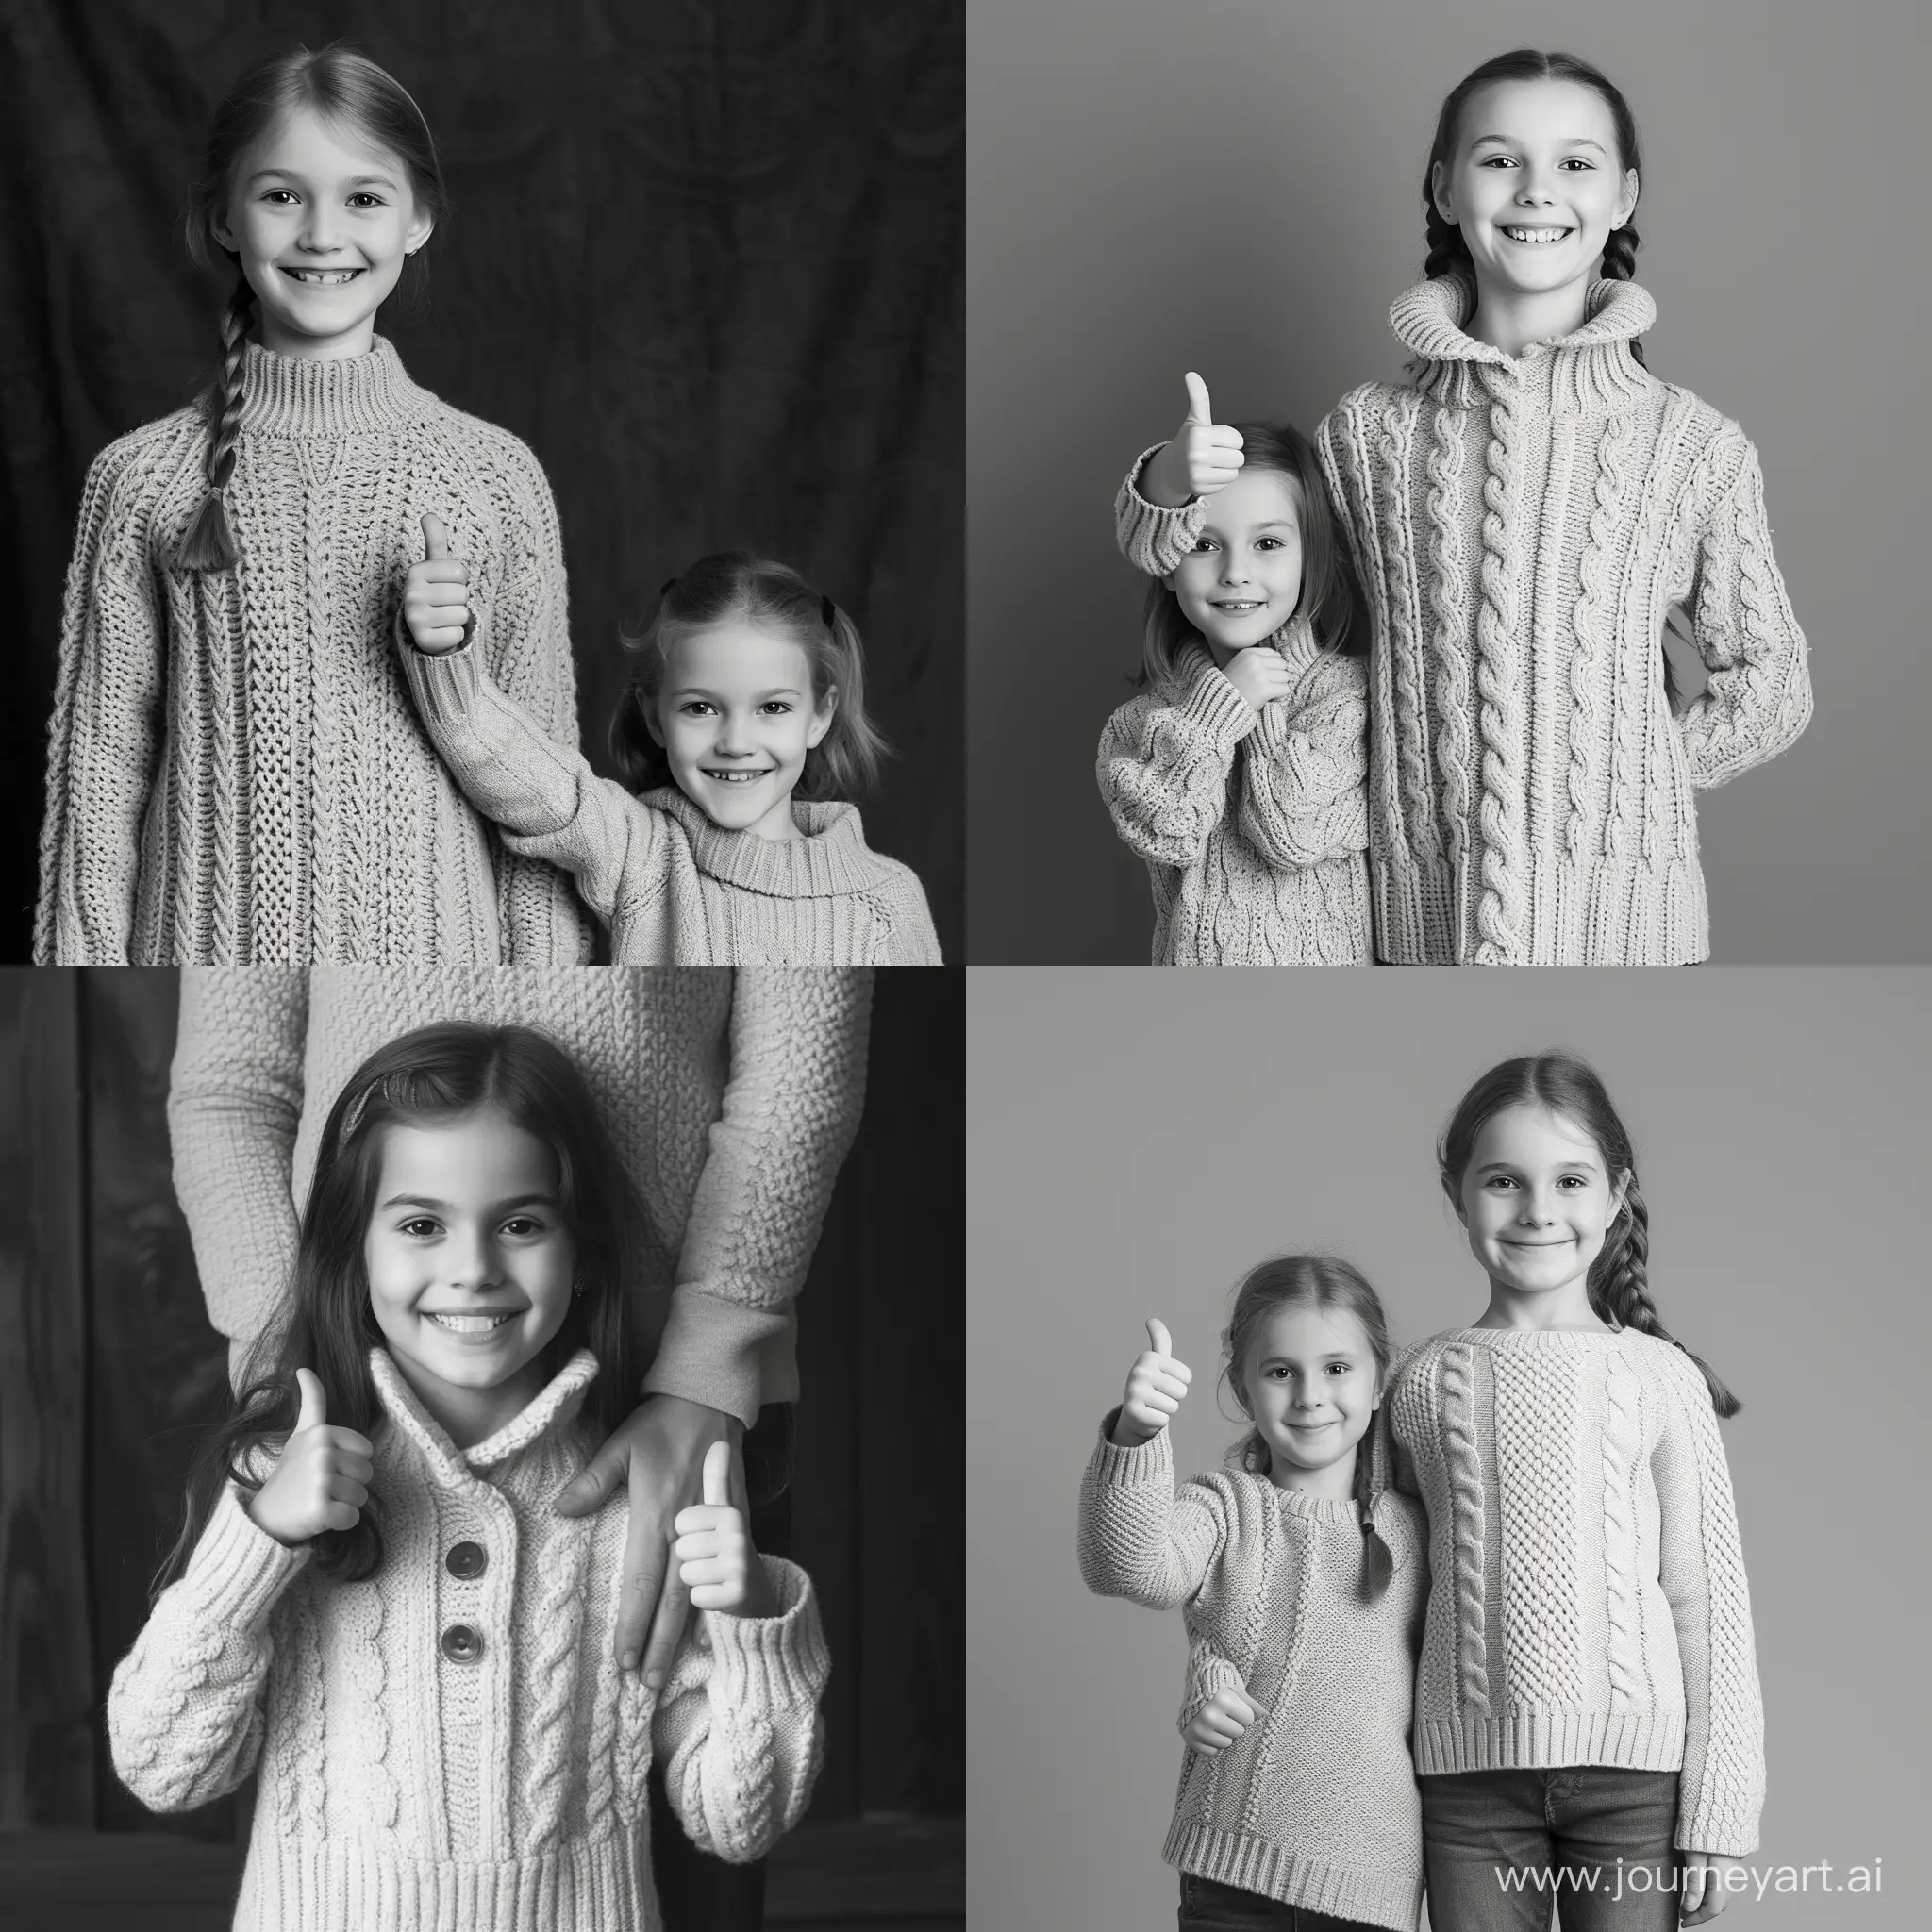 Cheerful-TenYearOld-Girl-in-LightColored-Sweater-Giving-Thumbs-Up